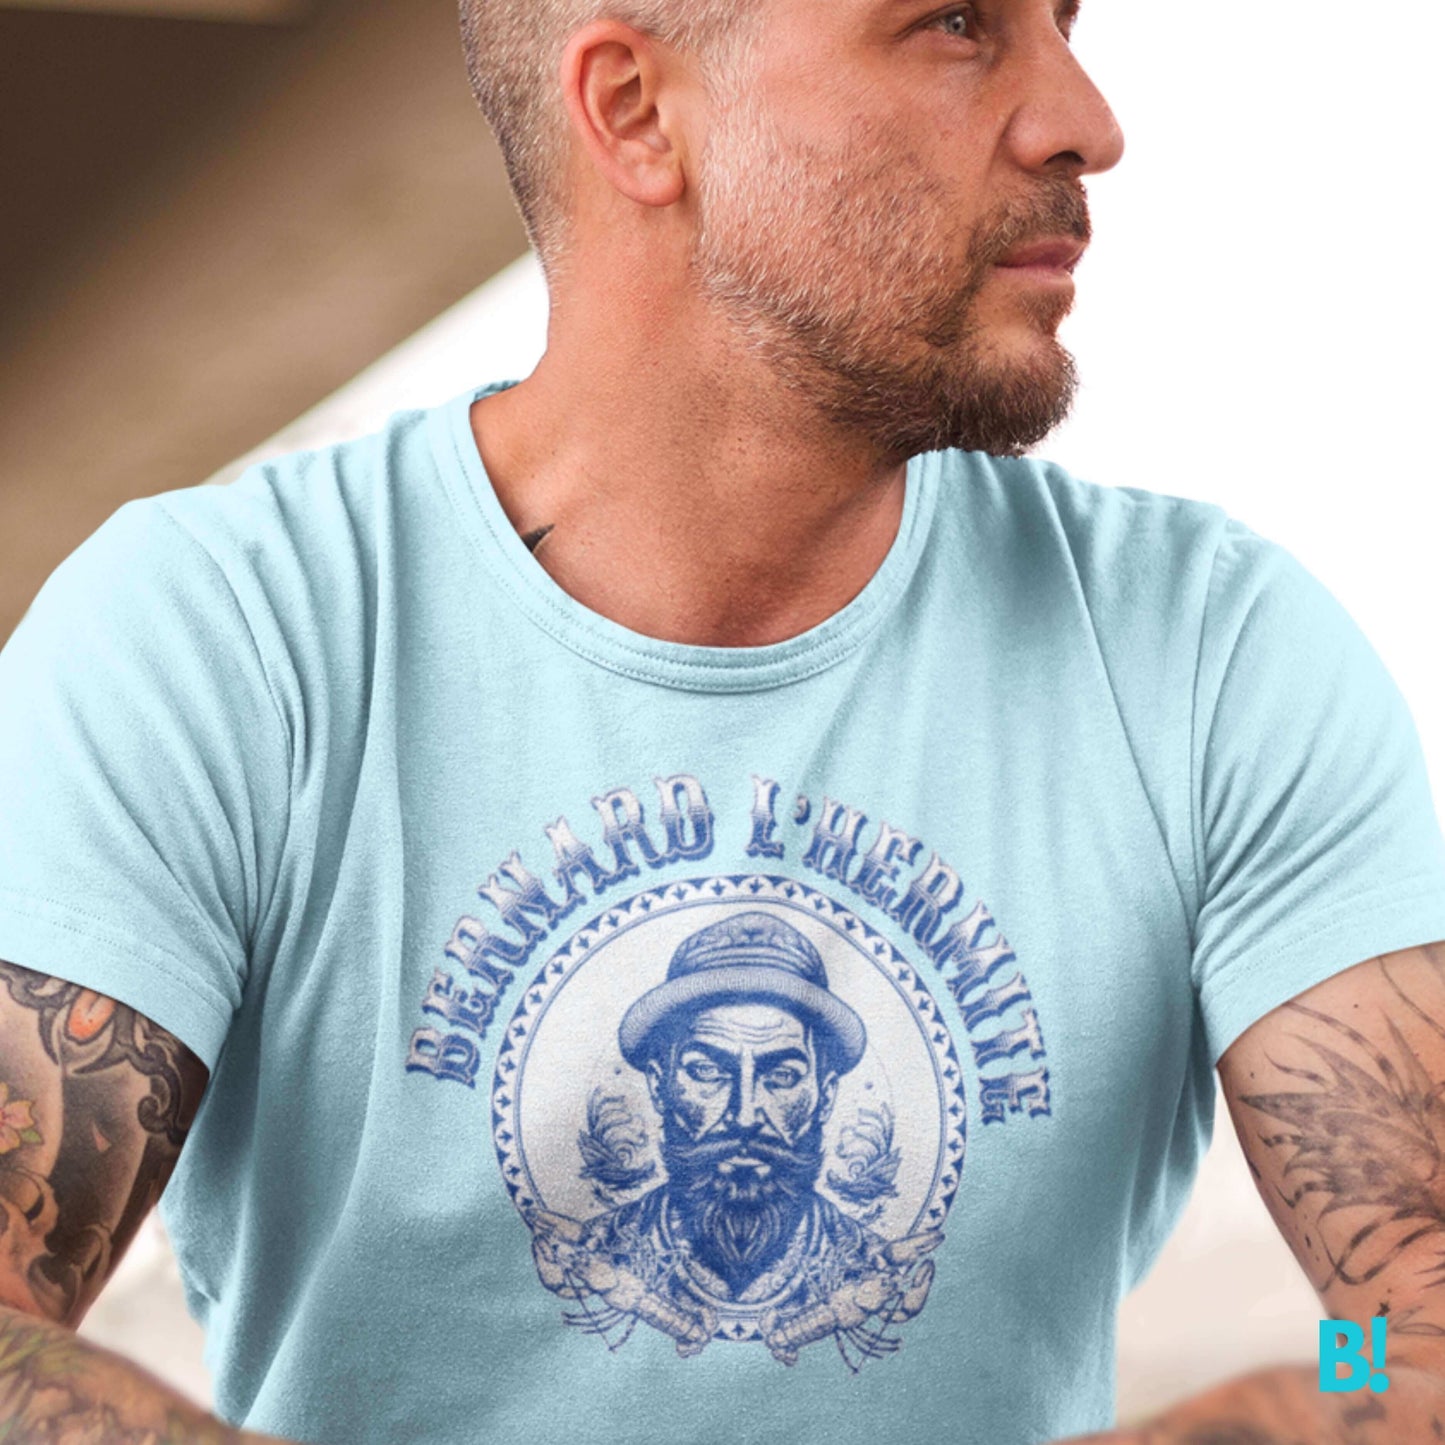 Bernard L'Hermite French Tattoo Retro Inspired Vintage T-Shirt Bonjour, adventurers! Find your fashion shell-titude with Bernard L'Hermite. This quirky tee is a tribute to French seaside charm. Embrace the spirit of exploration and embark on a journey of